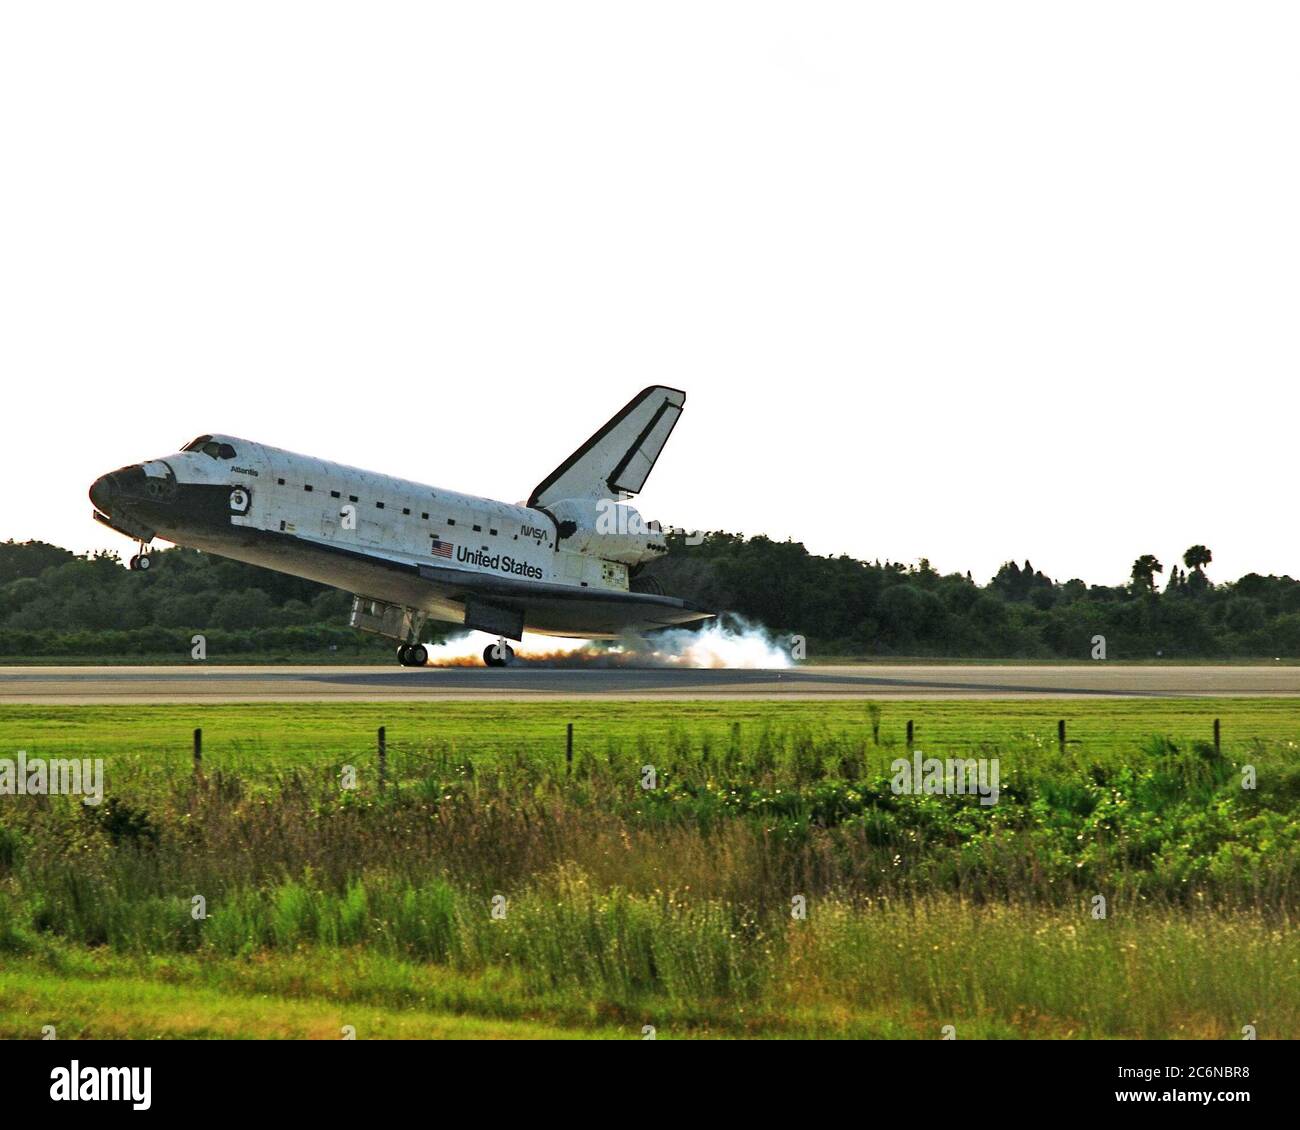 KENNEDY SPACE CENTER, Fla. -- The Space Shuttle orbiter Atlantis touches down on Runway 15 of the KSC Shuttle Landing Facility (SLF) to complete the nearly 11-day STS-86 mission. Main gear touchdown was at 5:55:09 p.m. EDT on Oct. 6, 1997. The unofficial mission-elapsed time at main gear touchdown was 10 days, 19 hours, 20 minutes and 50 seconds. The first two landing opportunities on Sunday were waved off because of weather concerns. The 87th Space Shuttle mission was the 40th landing of the Shuttle at KSC. On Sunday evening, the Space Shuttle program reached a milestone: The total flight tim Stock Photo